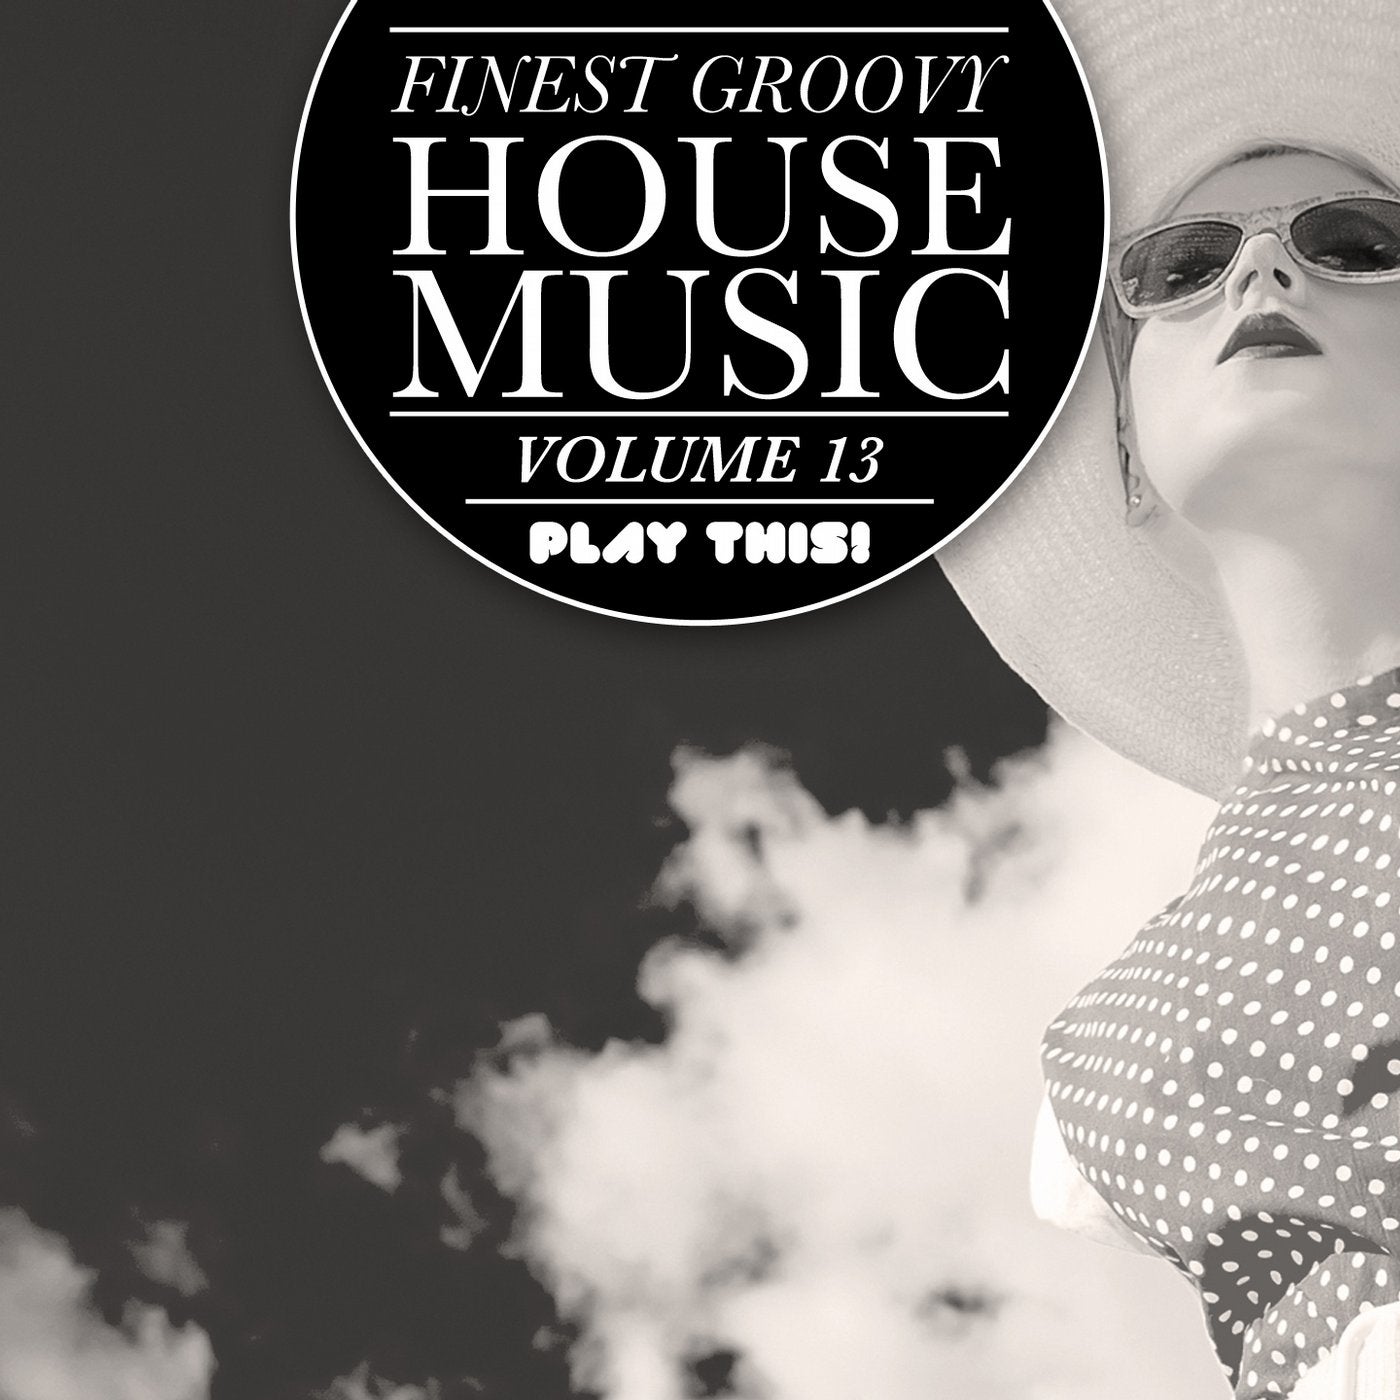 Finest Groovy House Music, Vol. 13